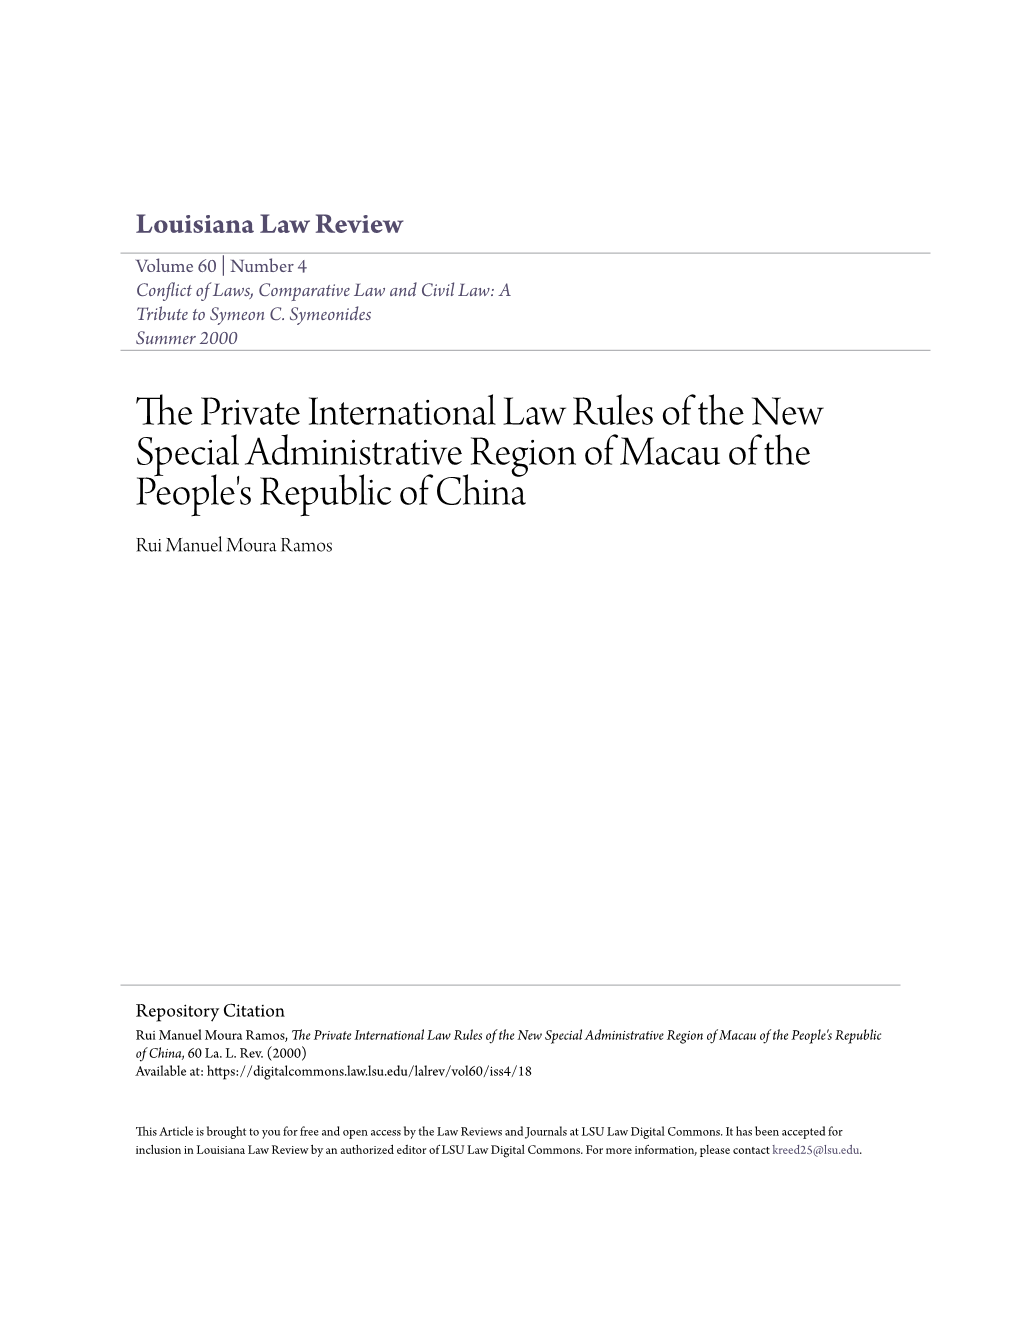 The Private International Law Rules of the New Special Administrative Region of Macau of the People's Republic of China, 60 La